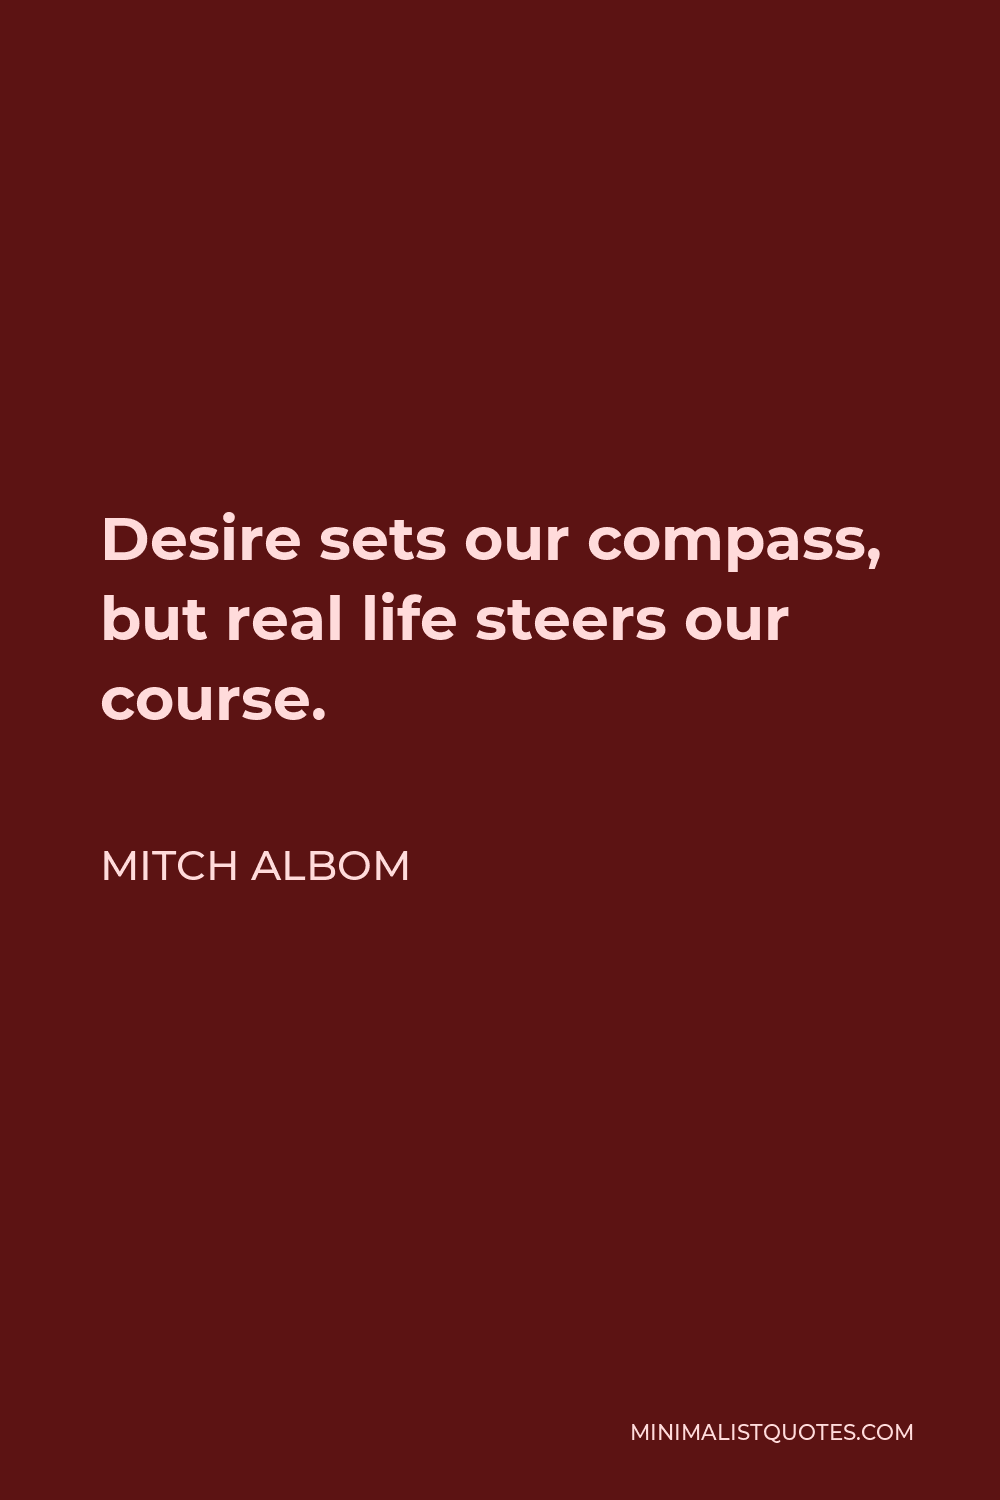 Mitch Albom Quote - Desire sets our compass, but real life steers our course.